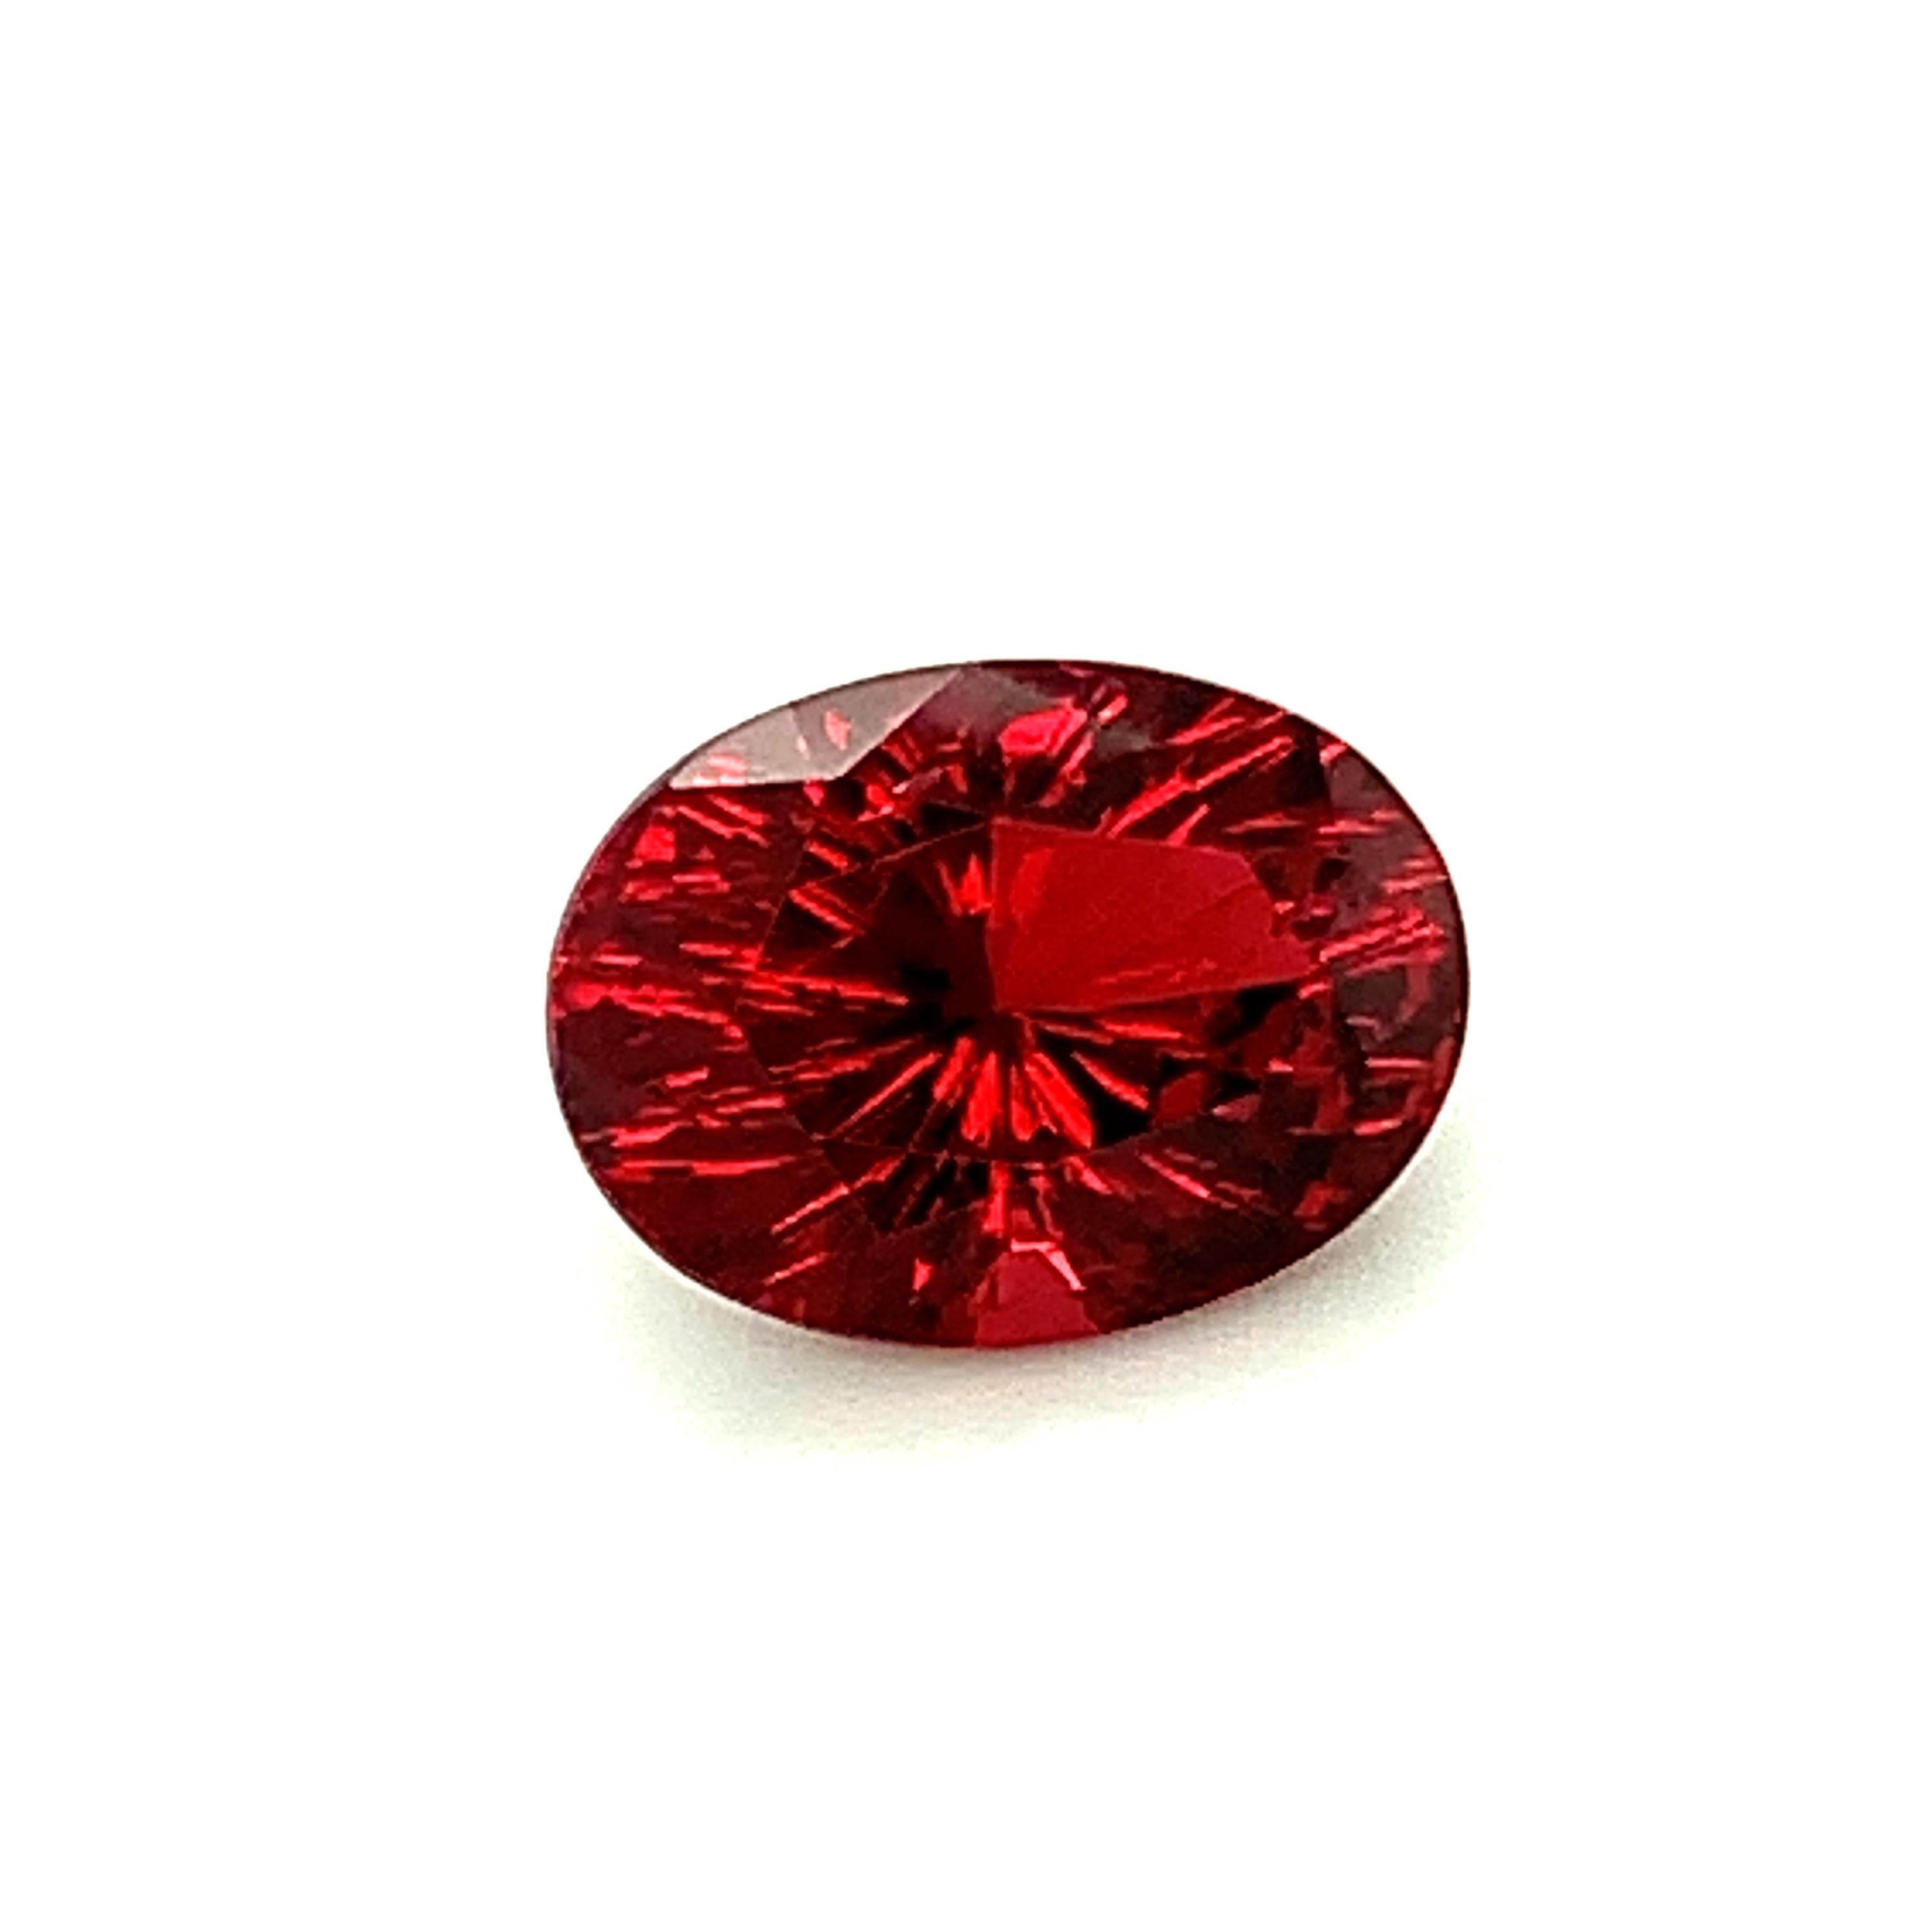 Oval Cut Unheated 4.84 Carat Red Spinel Oval, Unset Loose Gemstone, GIA Certified